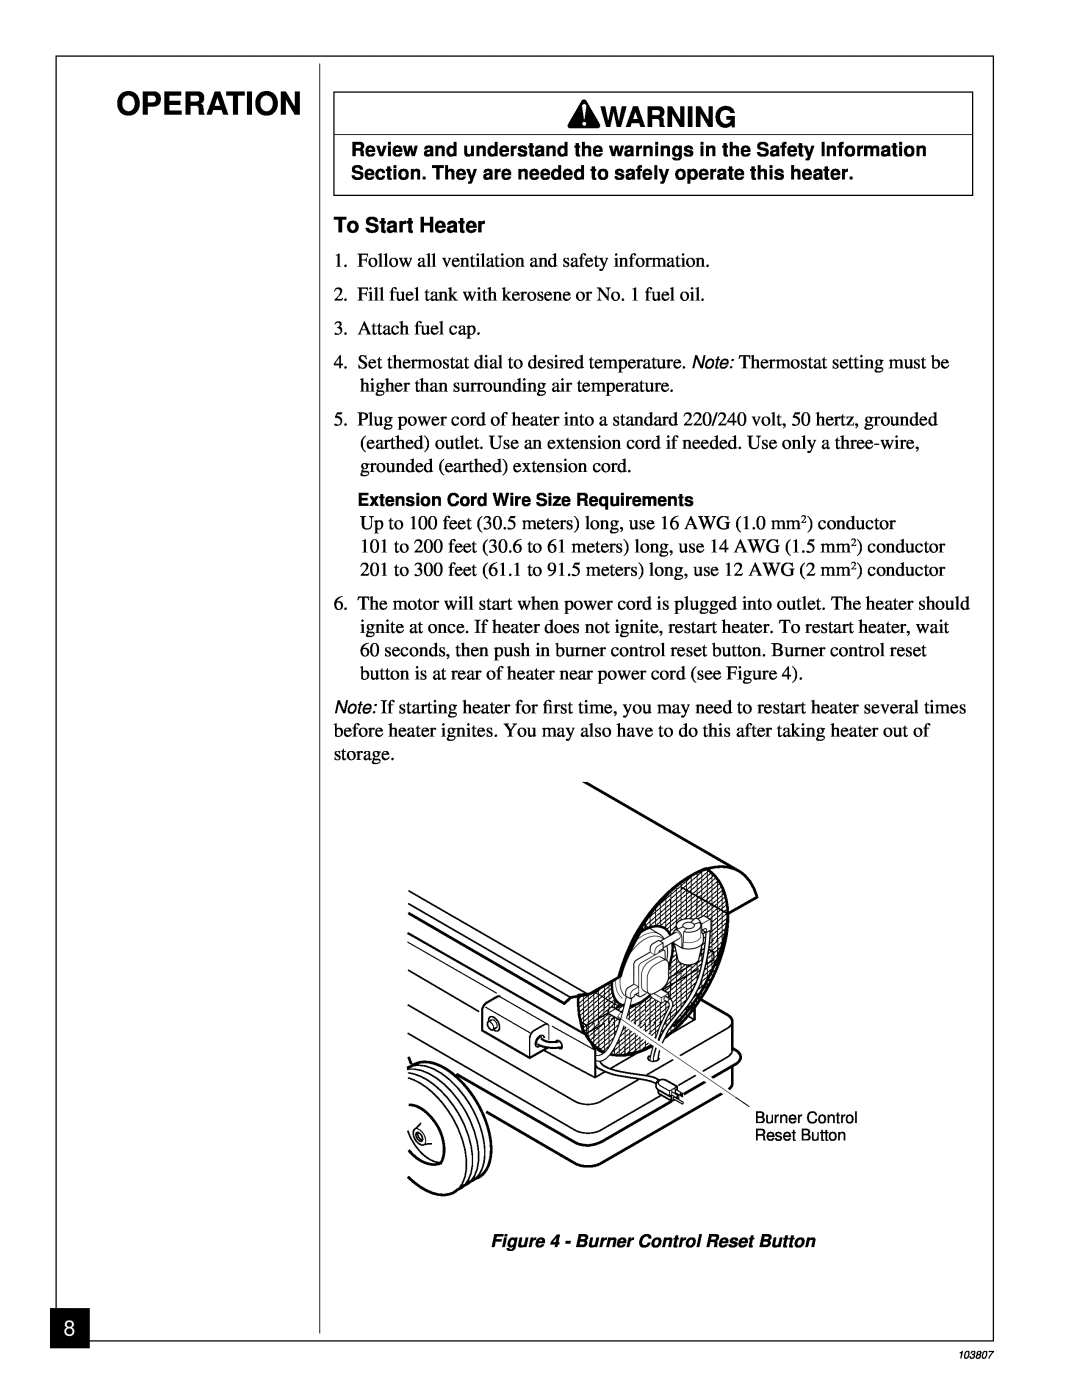 Desa B350CEA owner manual Operation, To Start Heater 